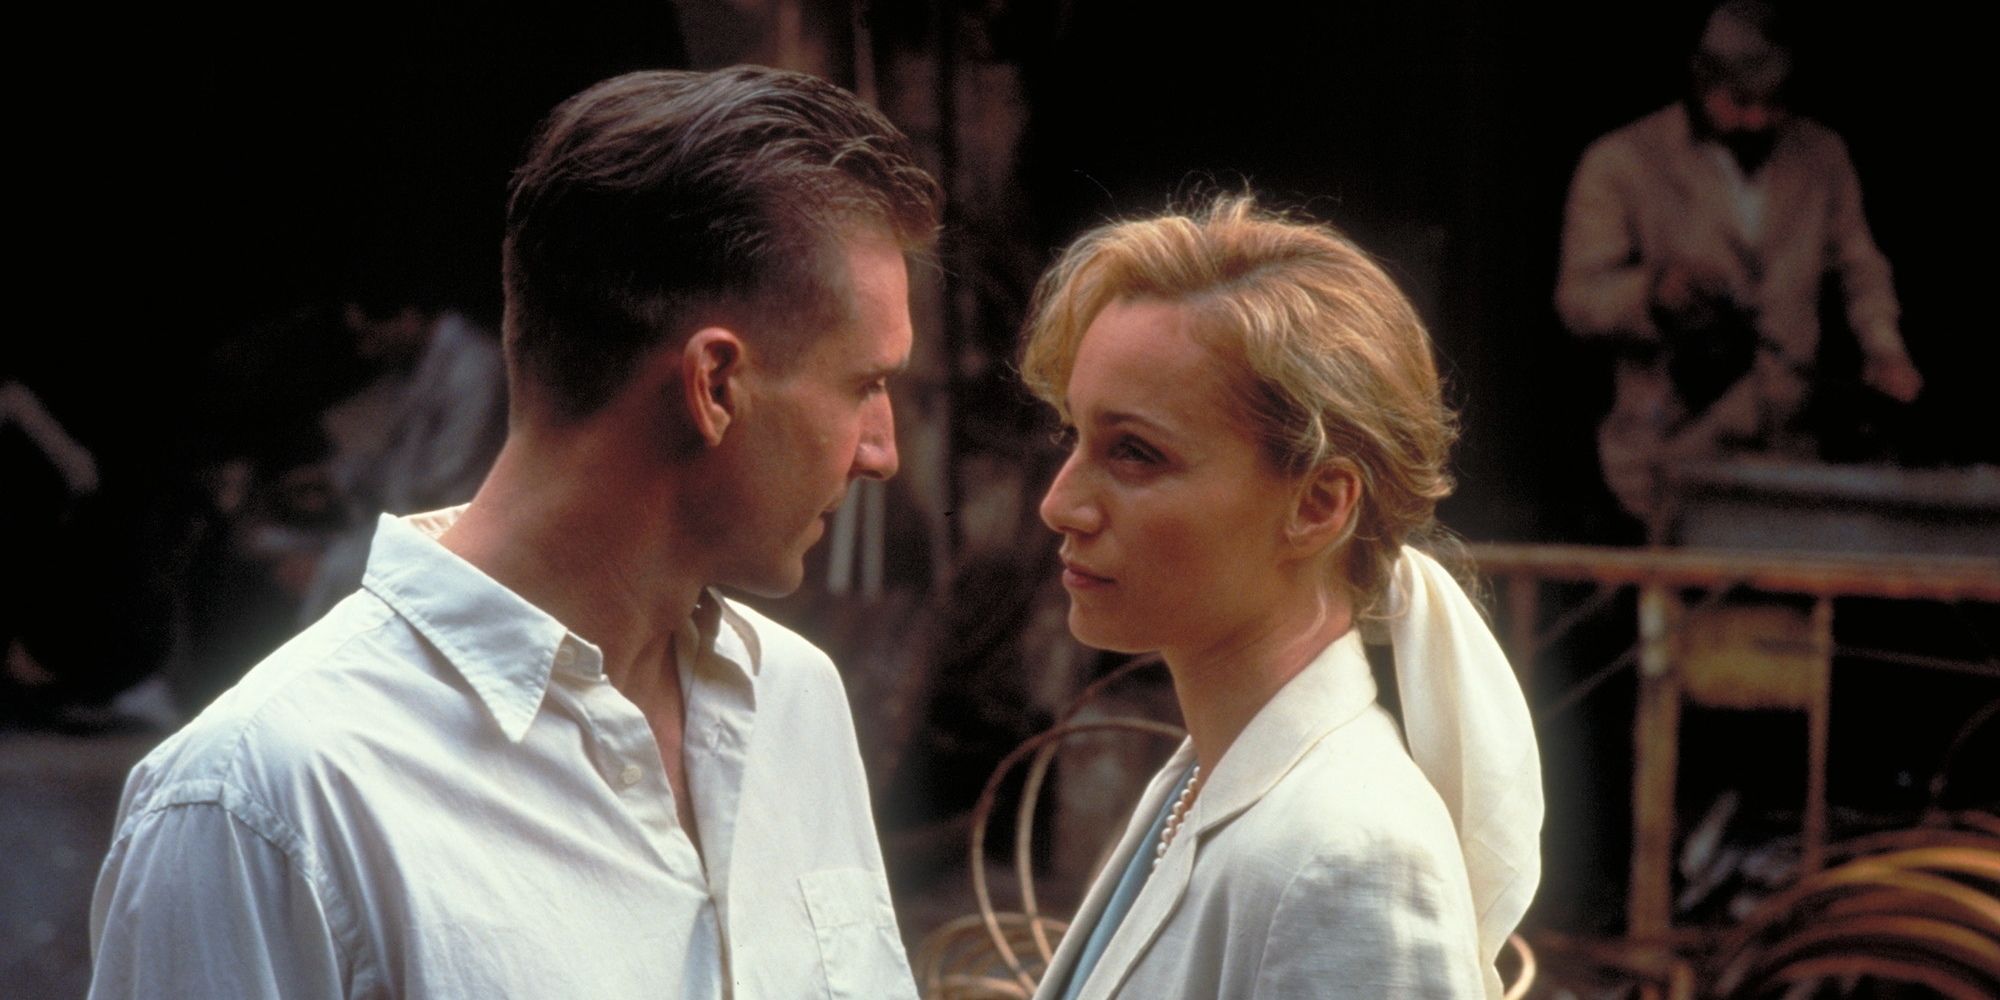 Laszlo and Katharine looking at each other in The English Patient